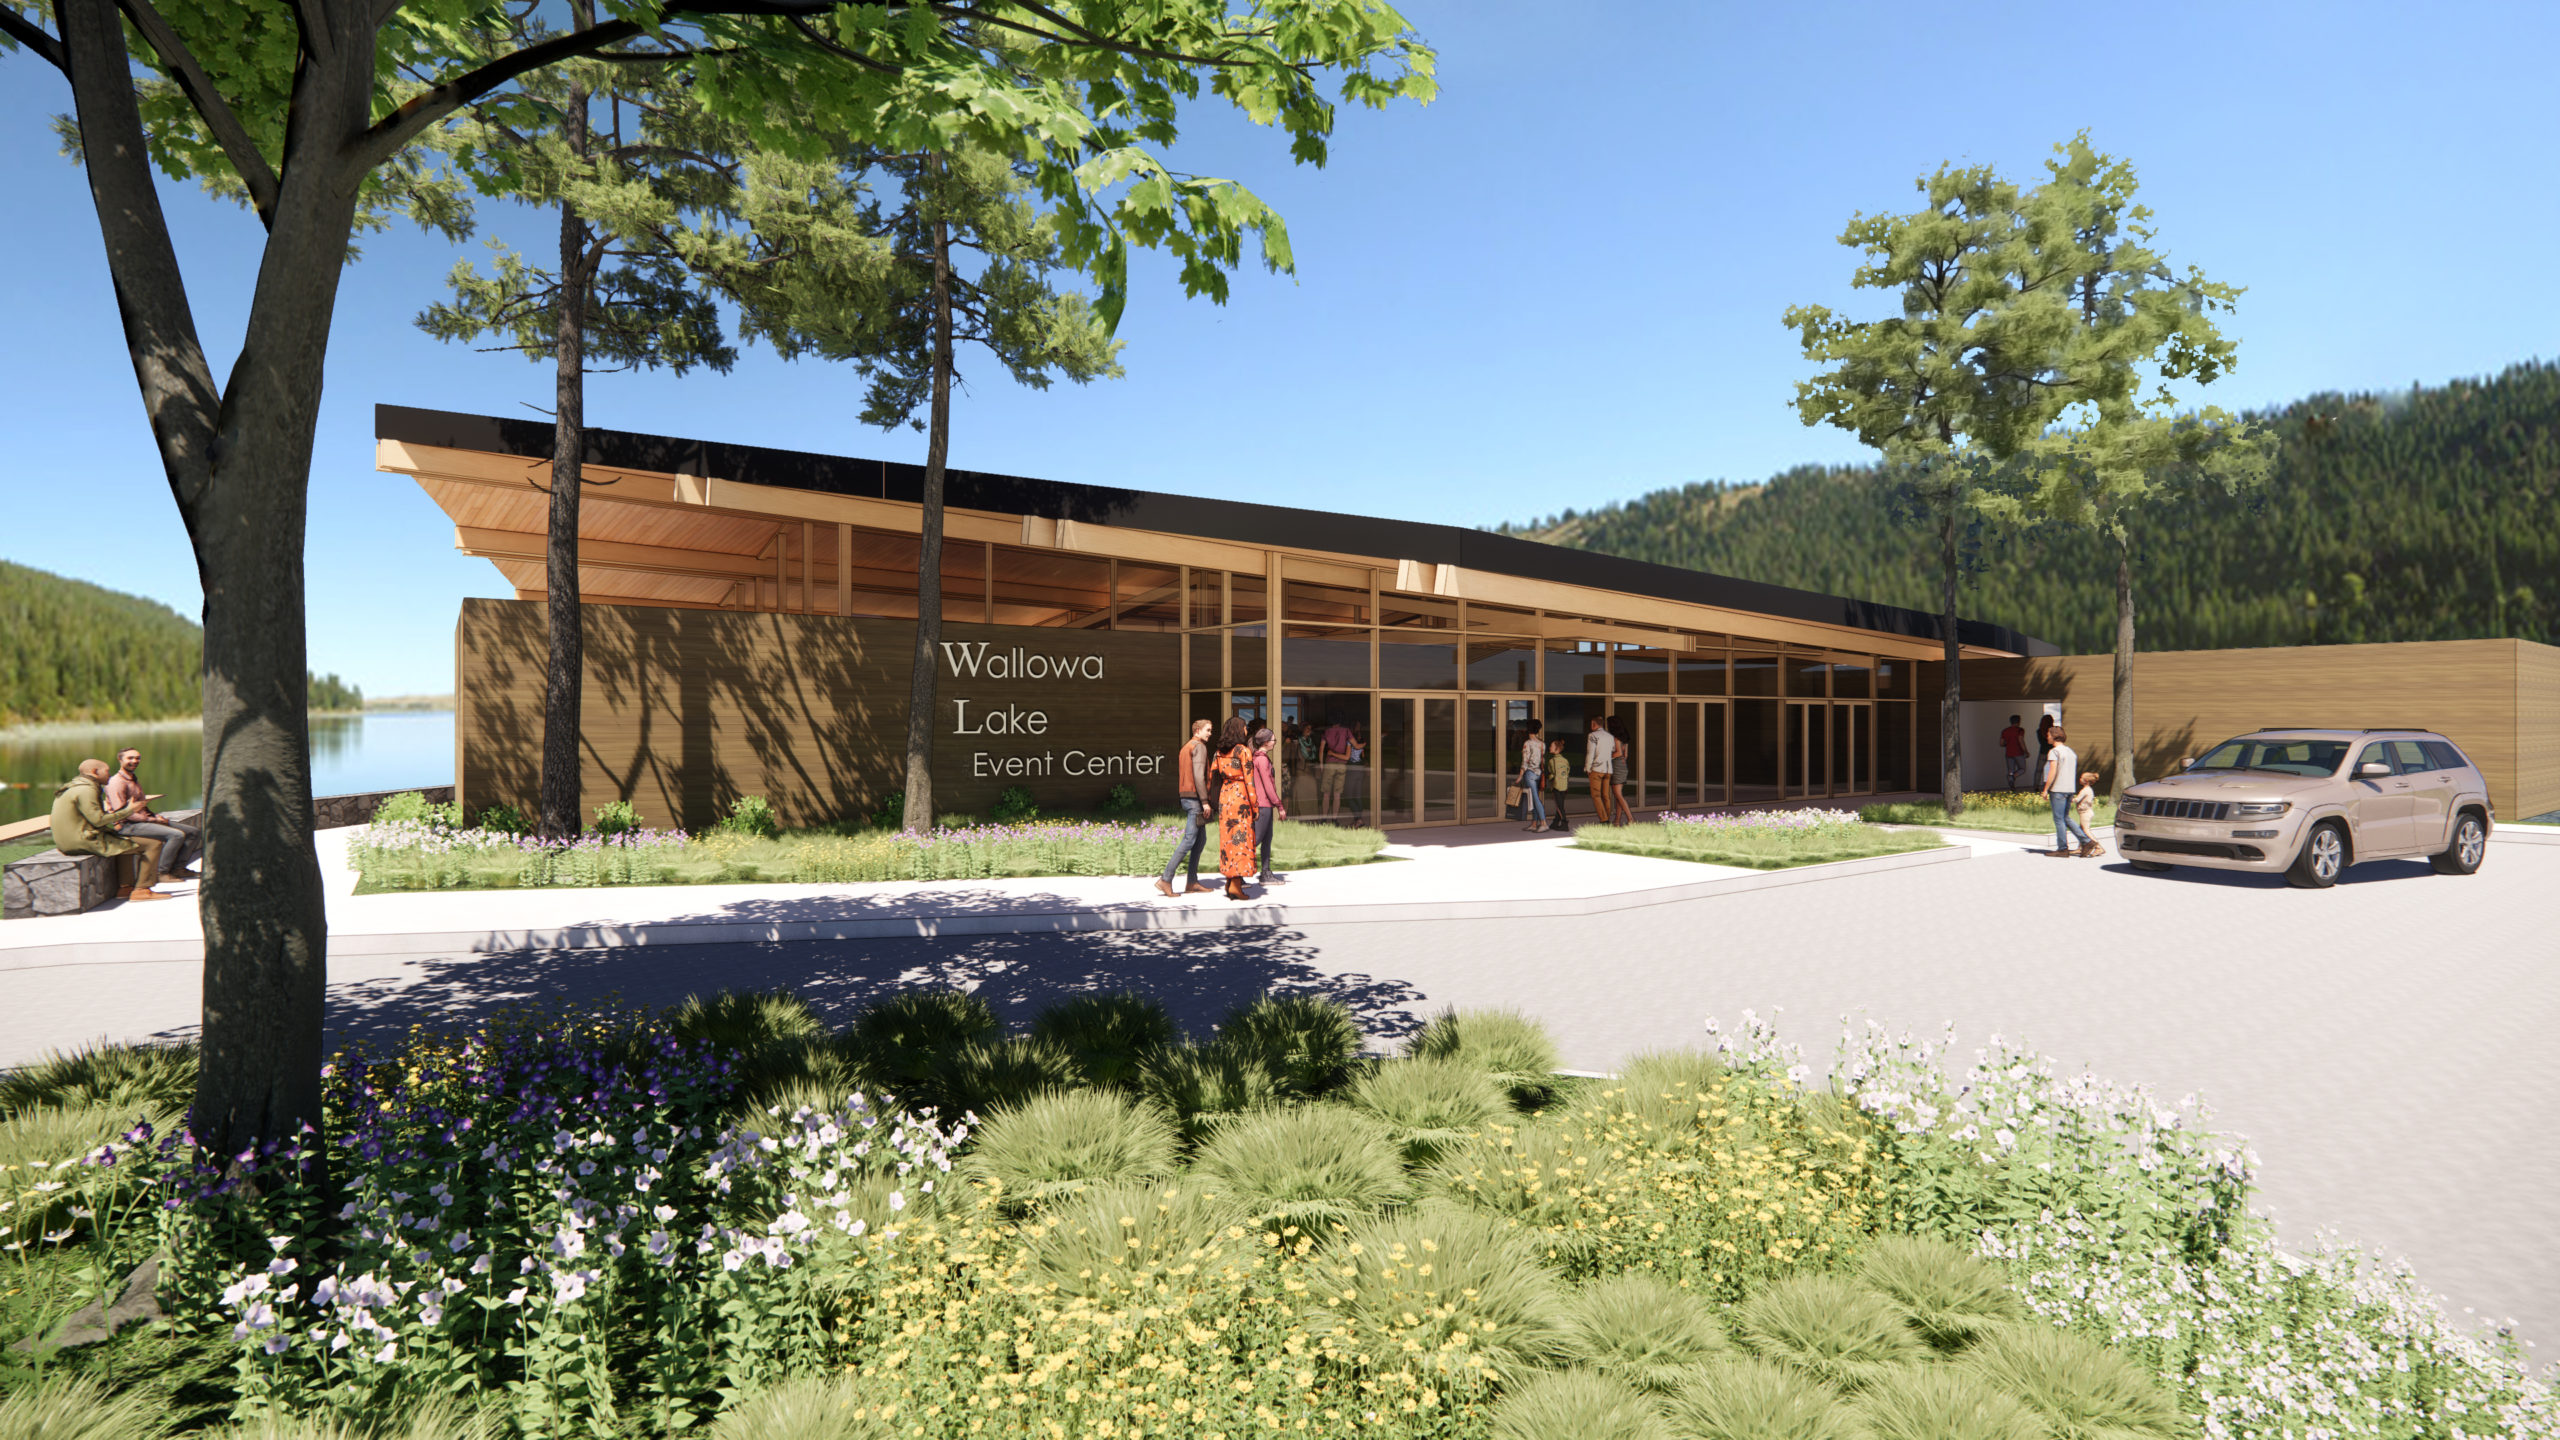 Wallowa Lake Event Center Concept Design. Glass-walled event center with flat, angled mass-timber roof showing people in the foreground and Wallowa Lake in the background.